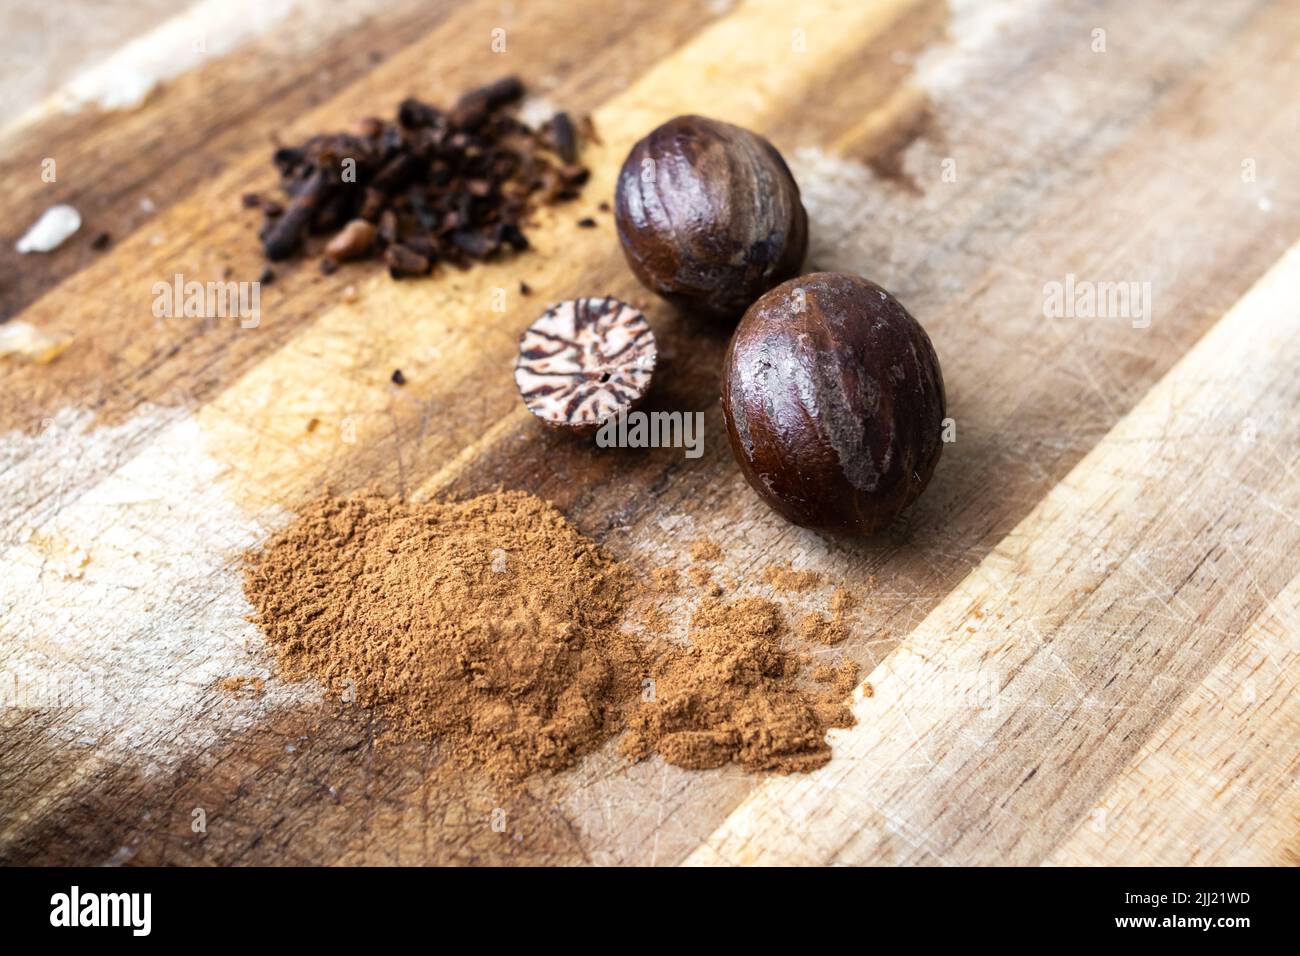 Close-up of nutmeg in its raw form on a wooden chopping block in Grenada. Includes ground nutmeg, a cross-section of a nutmeg, chopped cloves. Stock Photo